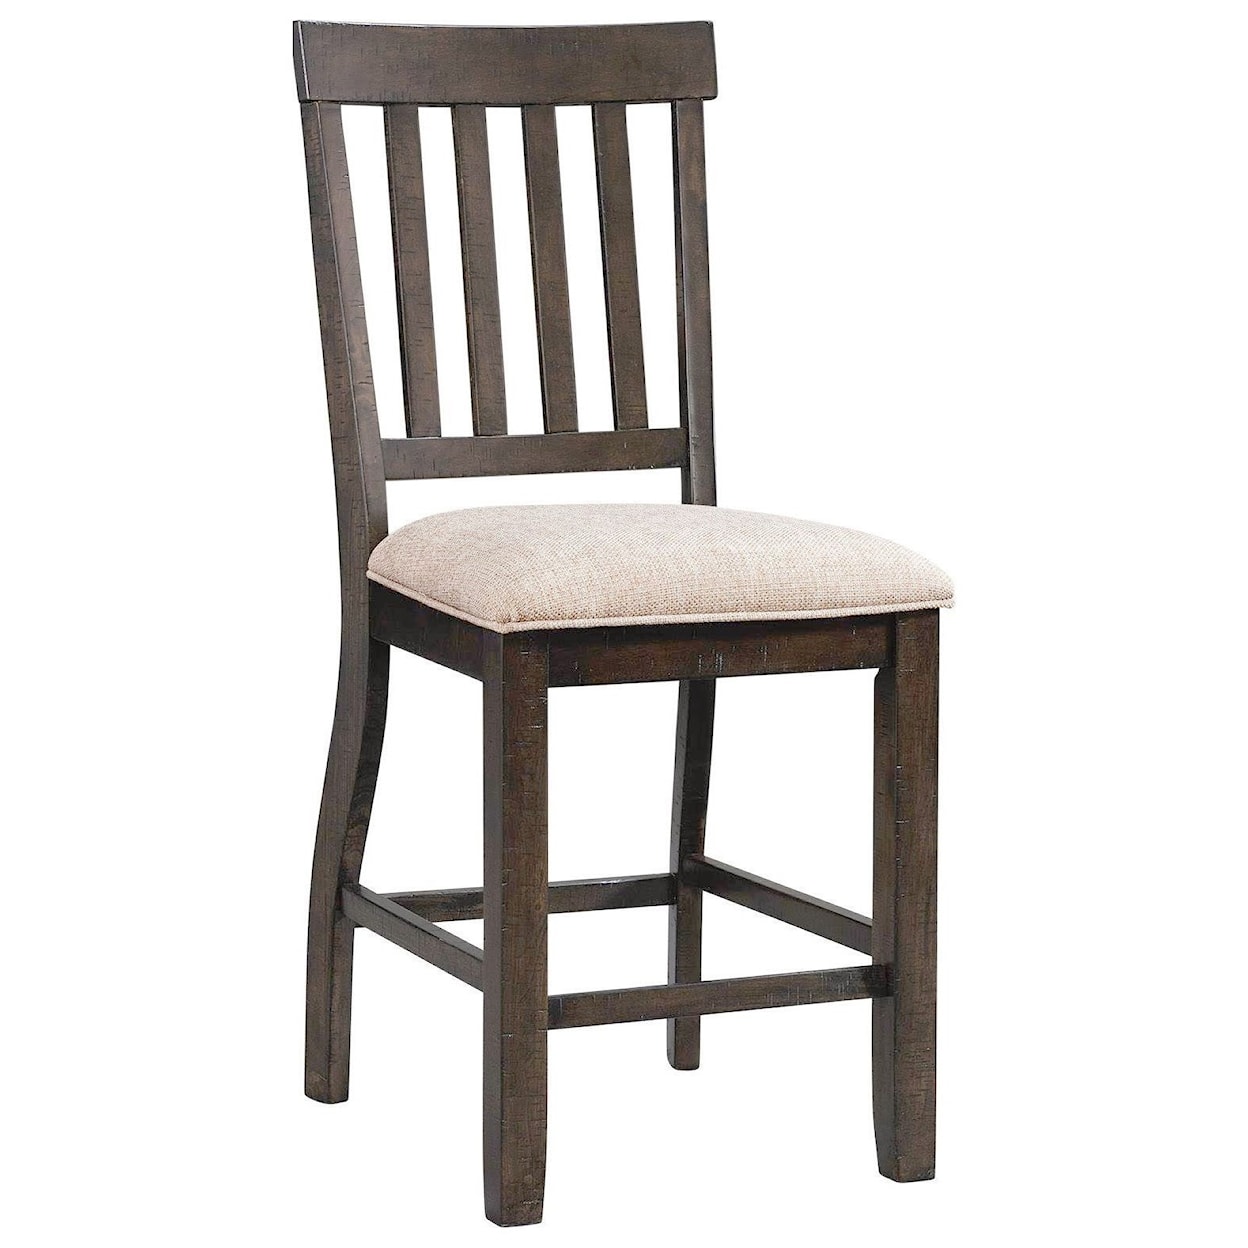 Elements Stone Counter Dining Chair Slat Back Set